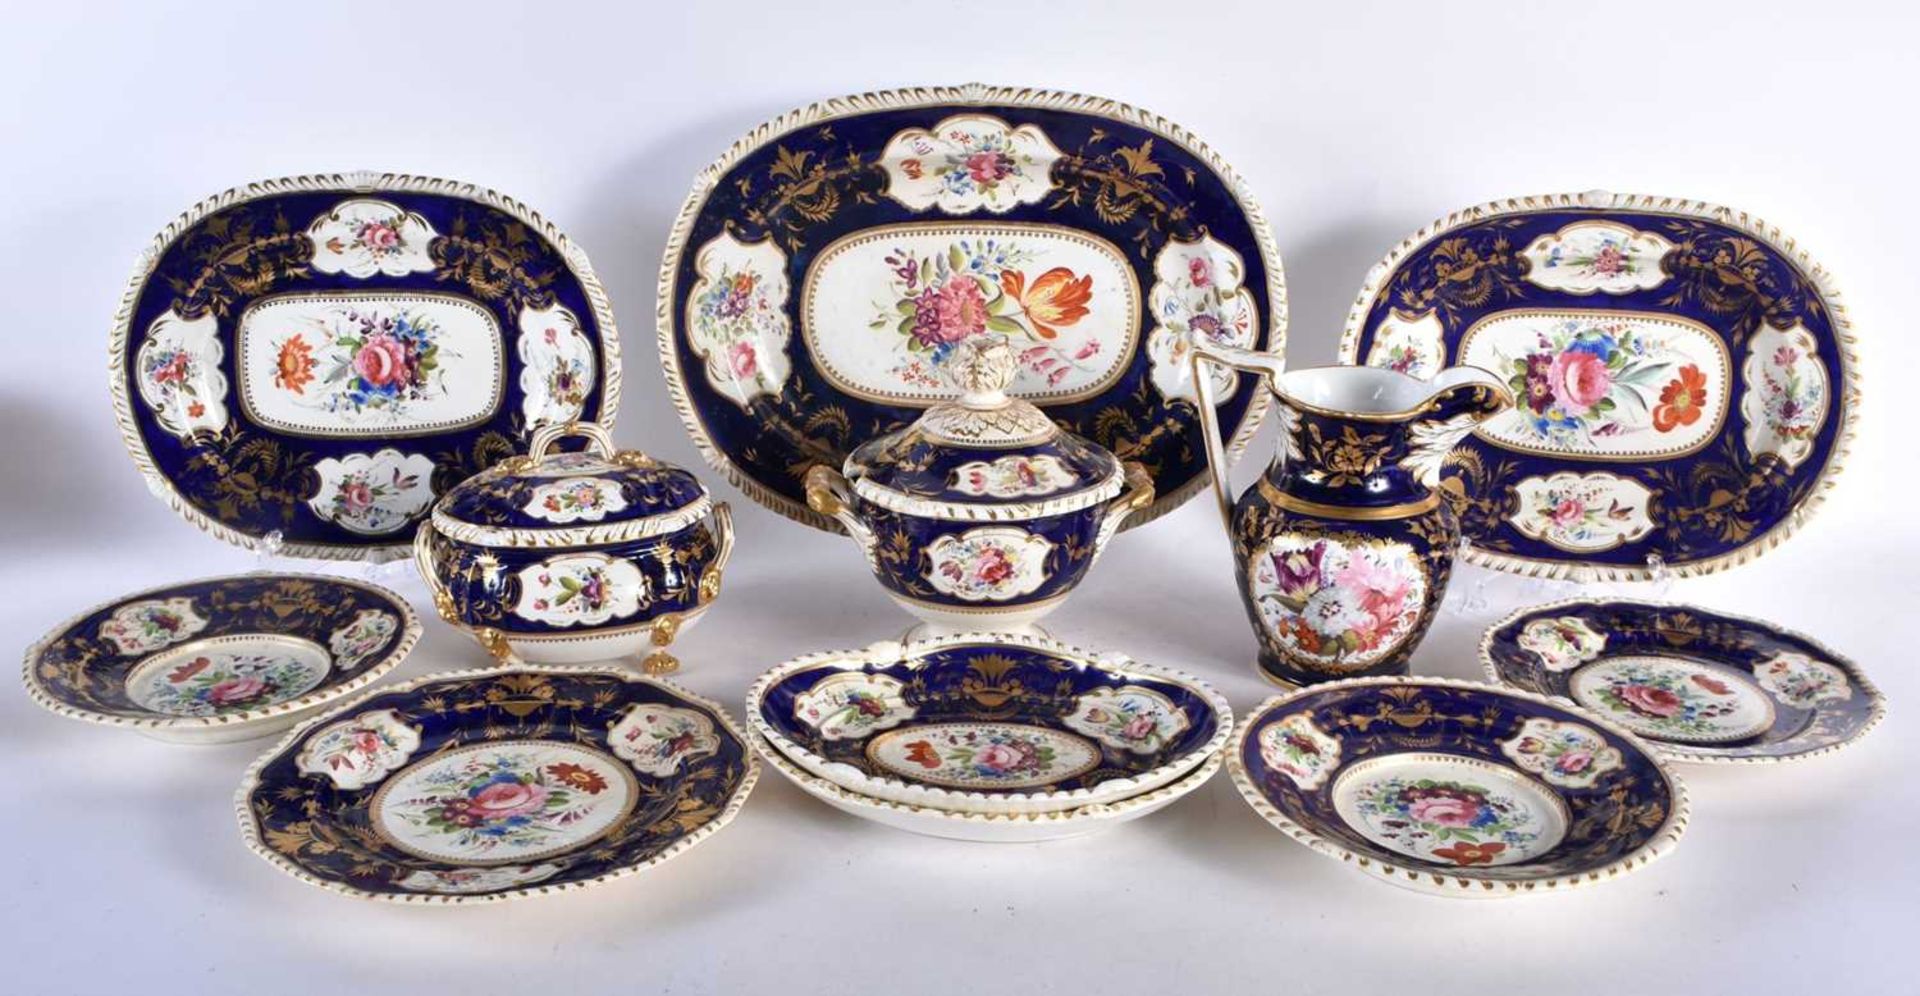 ASSORTED EARLY 19TH CENTURY DERBY WARES including a jug, dessert plates etc. Largest 30 cm wide. (